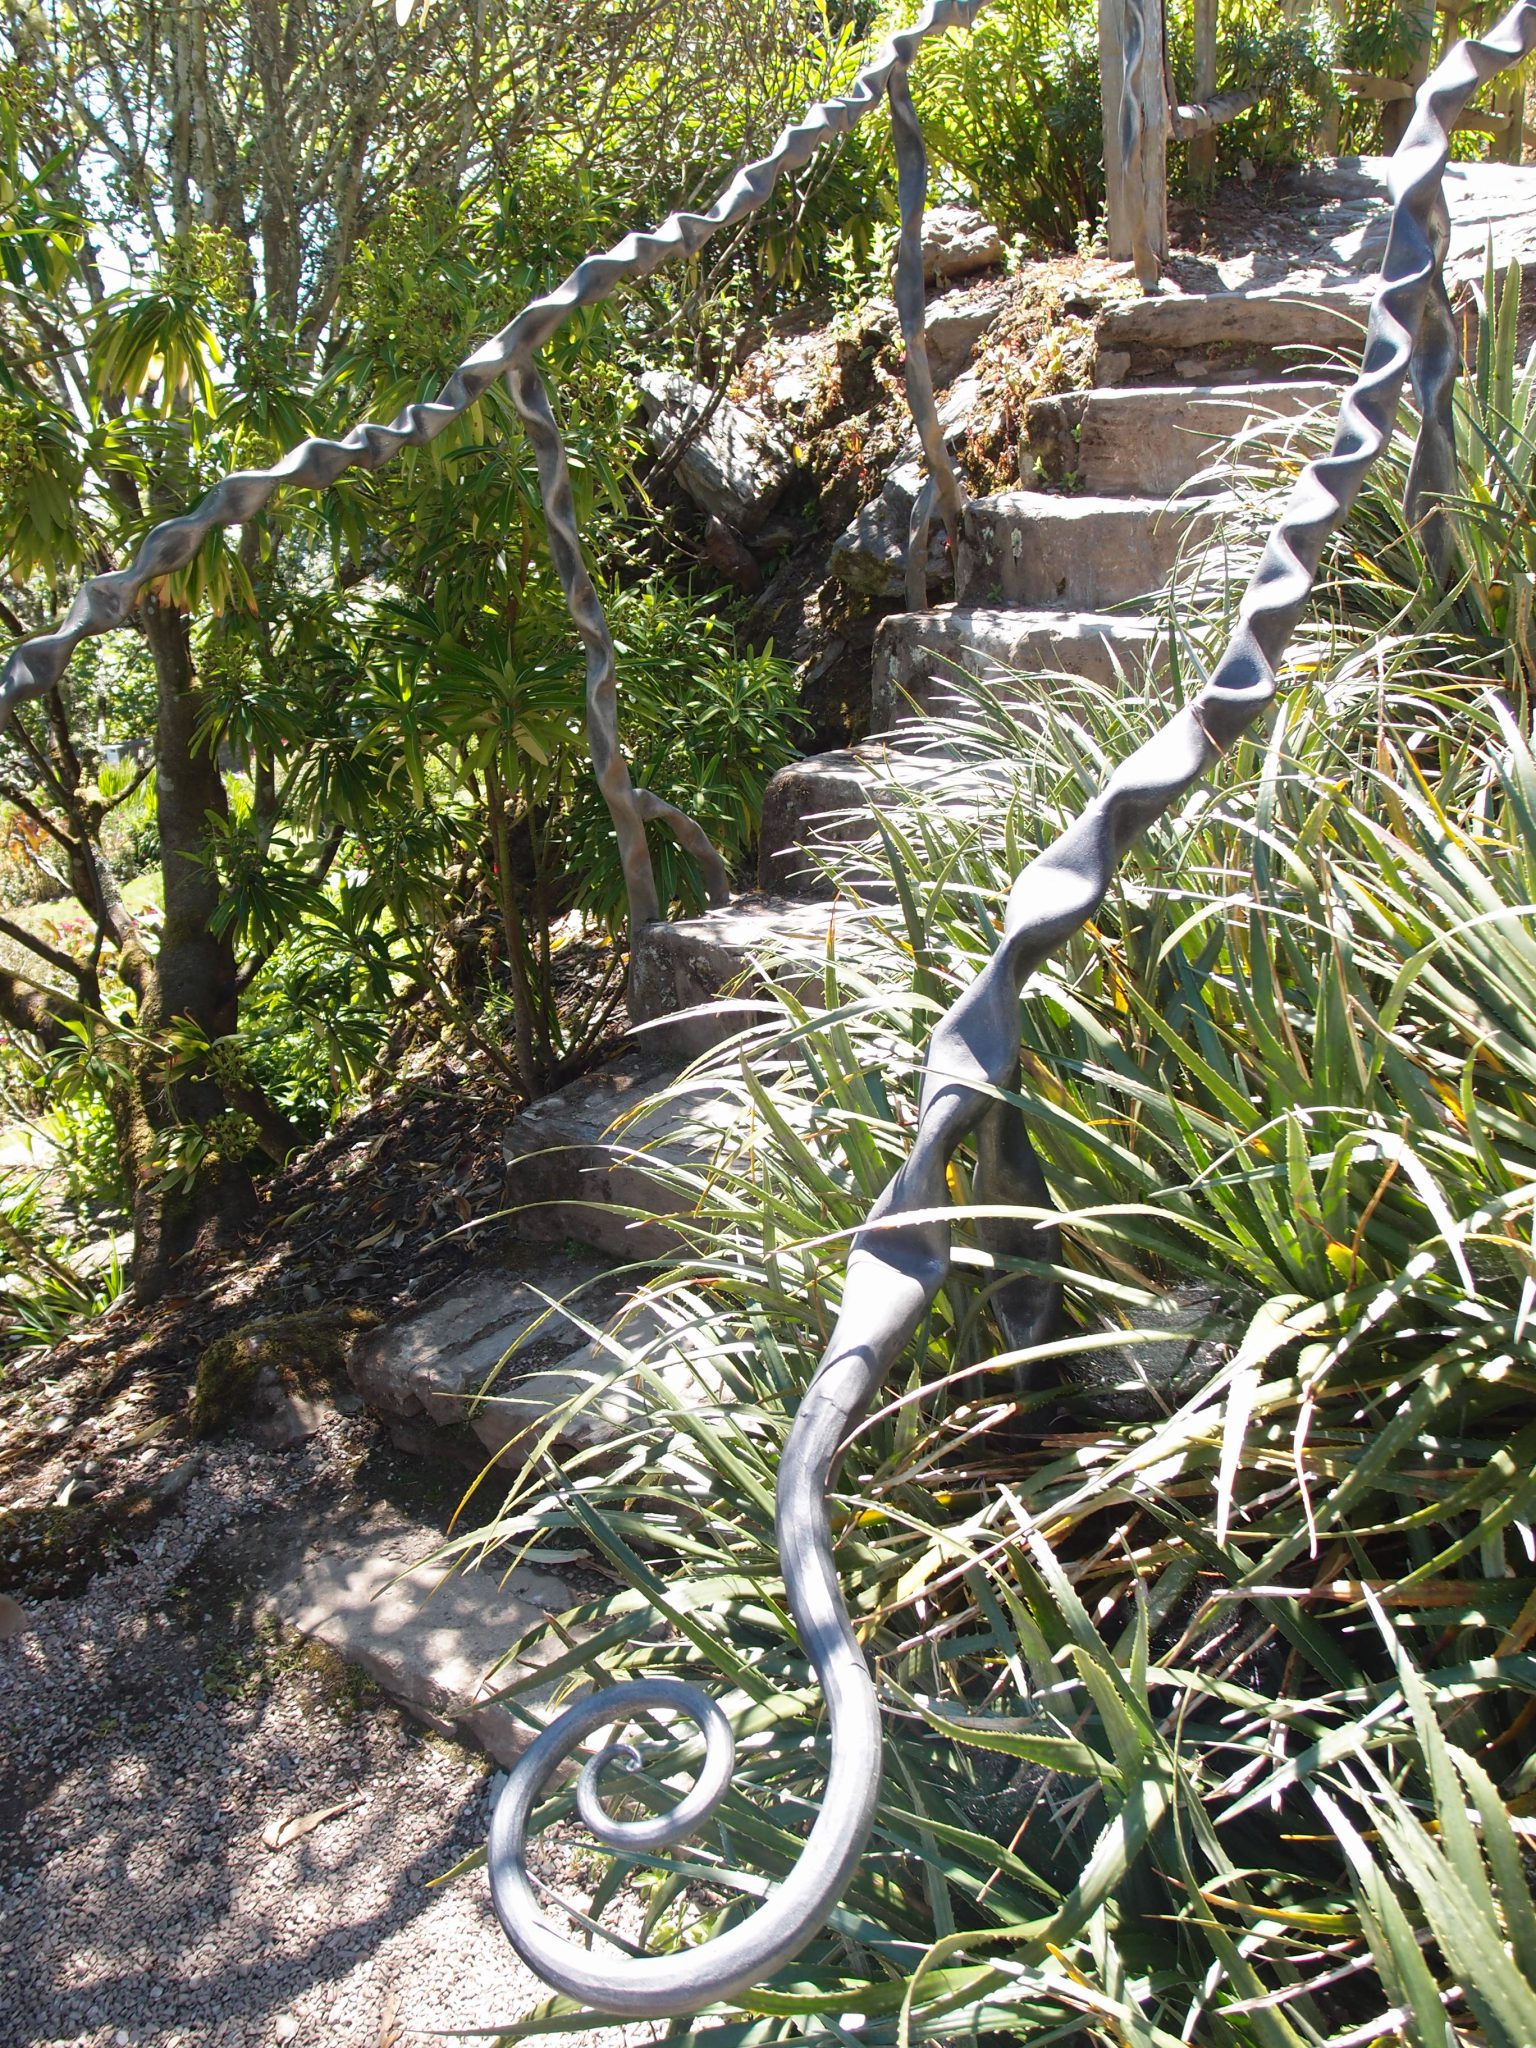 A flight of stairs in the Rock Dell leads up, toward the Olive Grove & Picnic Area.